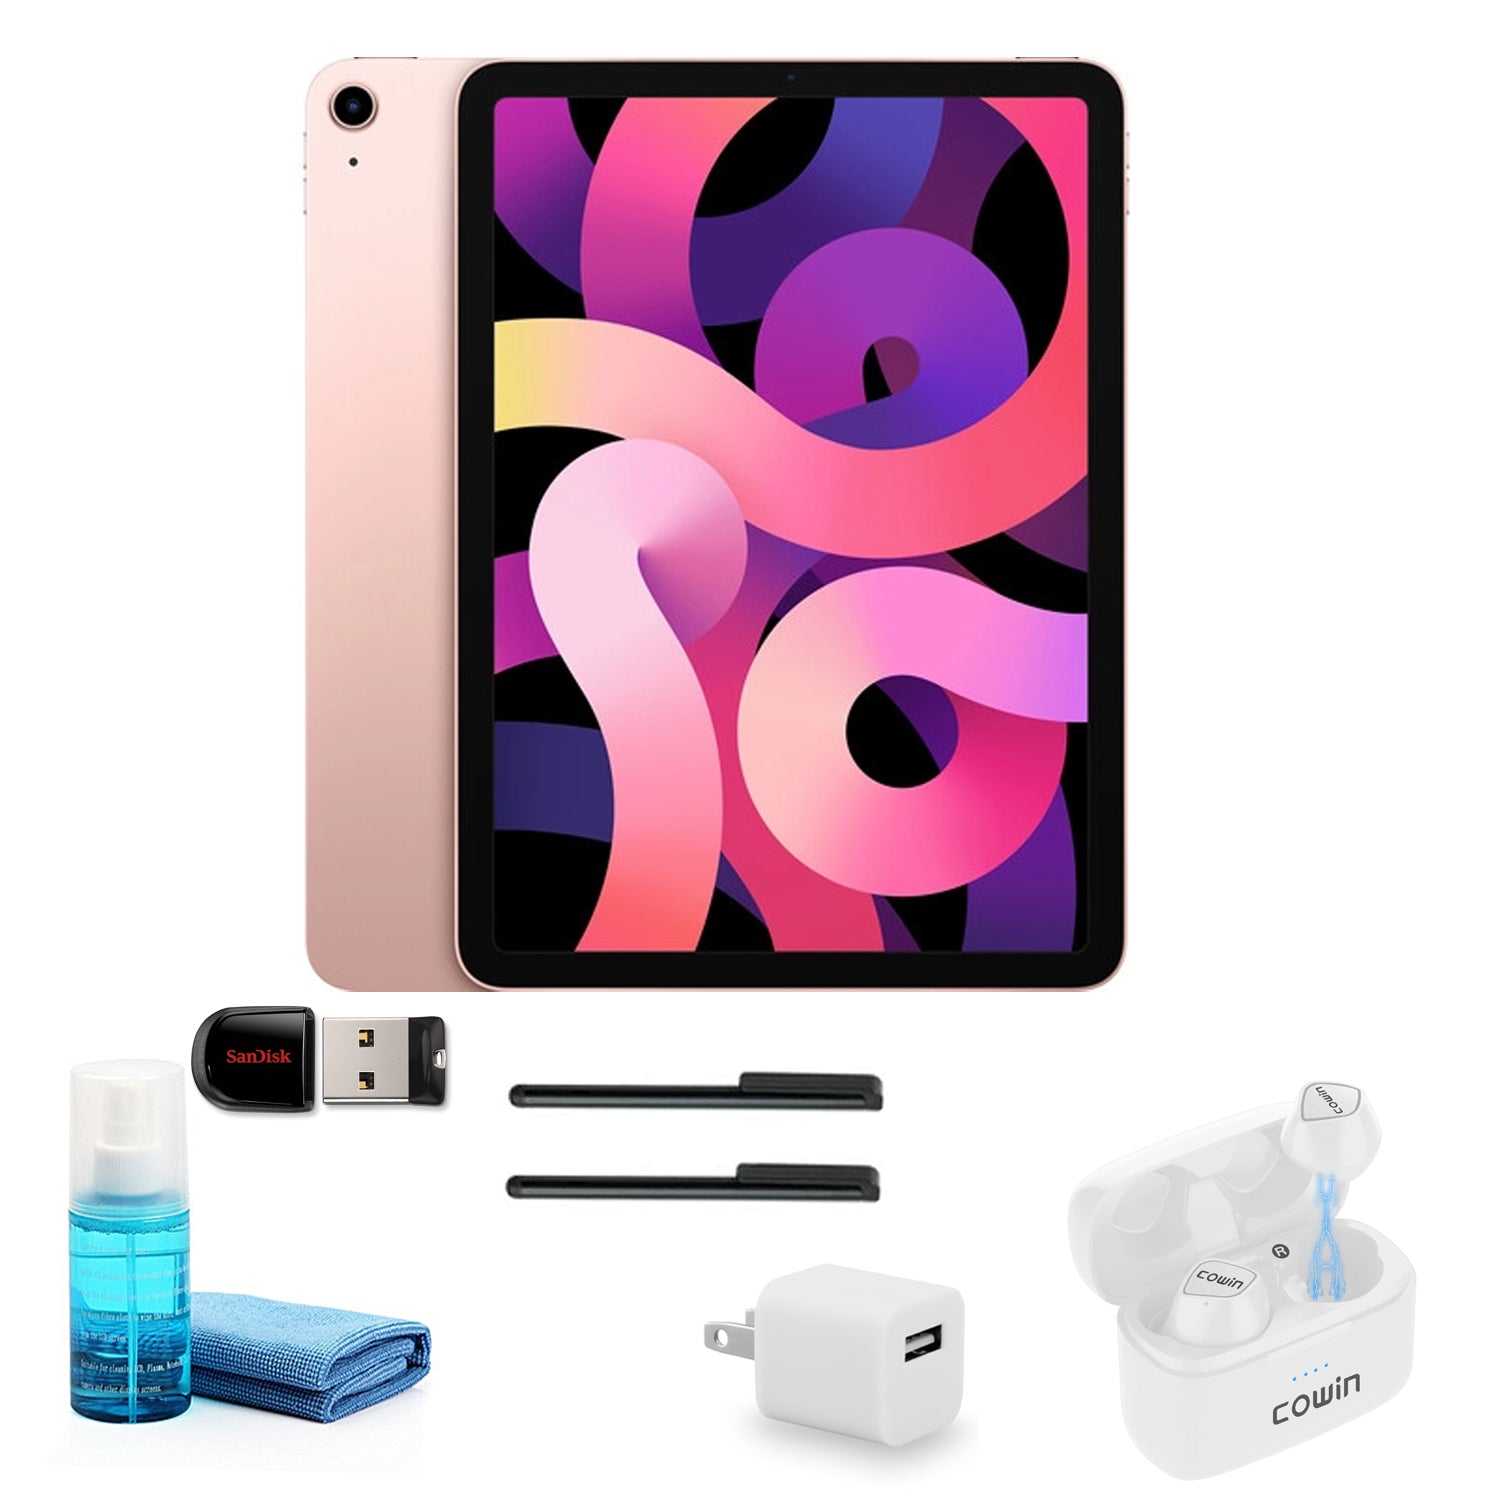 Apple iPad Air 10.9 Inch (64GB, Rose Gold) with White Wireless Earbuds and more